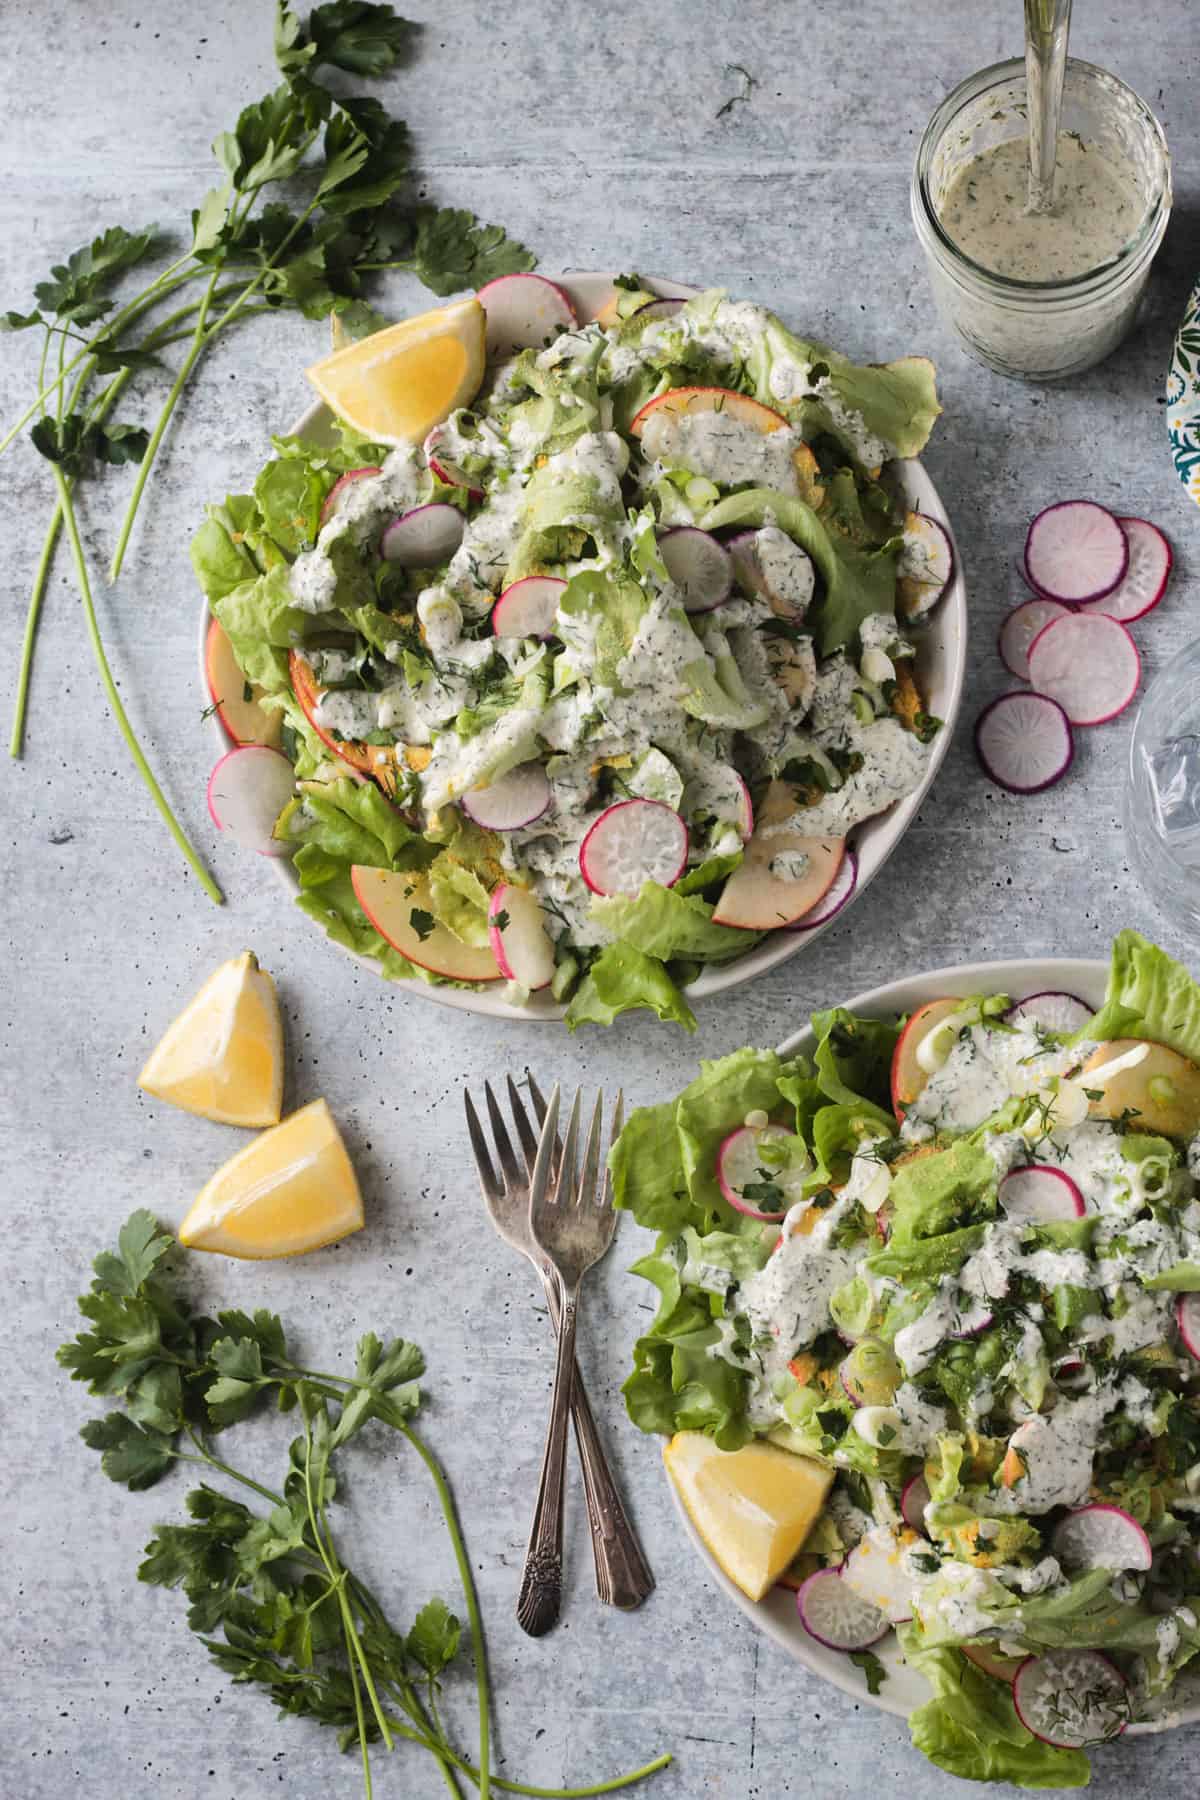 Plate of salad with apples and radishes drizzled with ranch dressing.